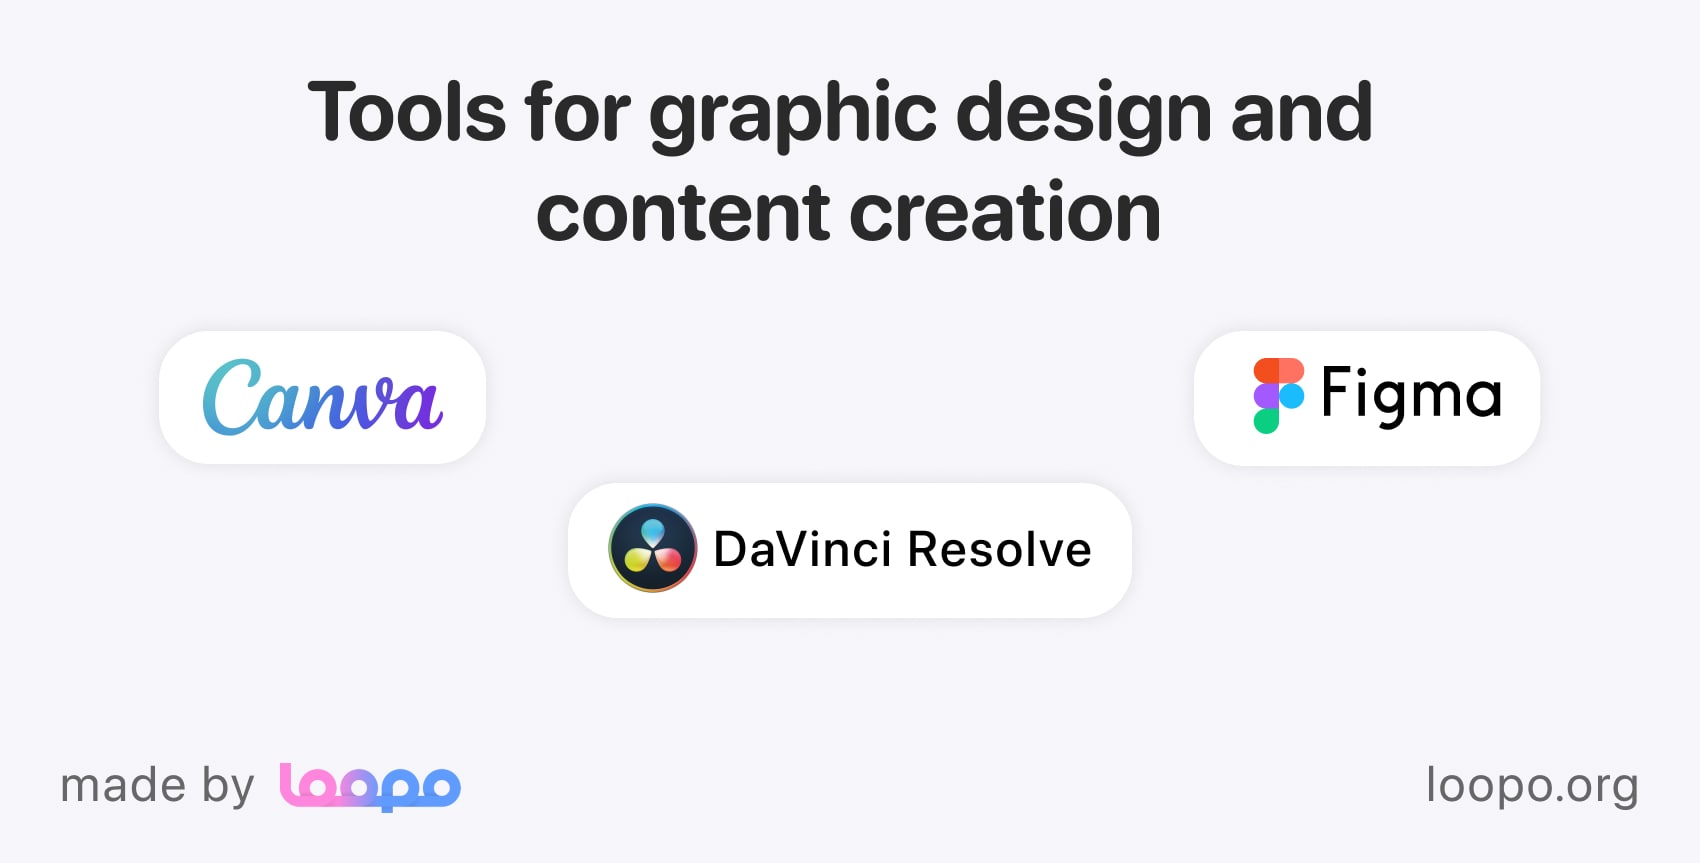 Tools for graphic design and content creation